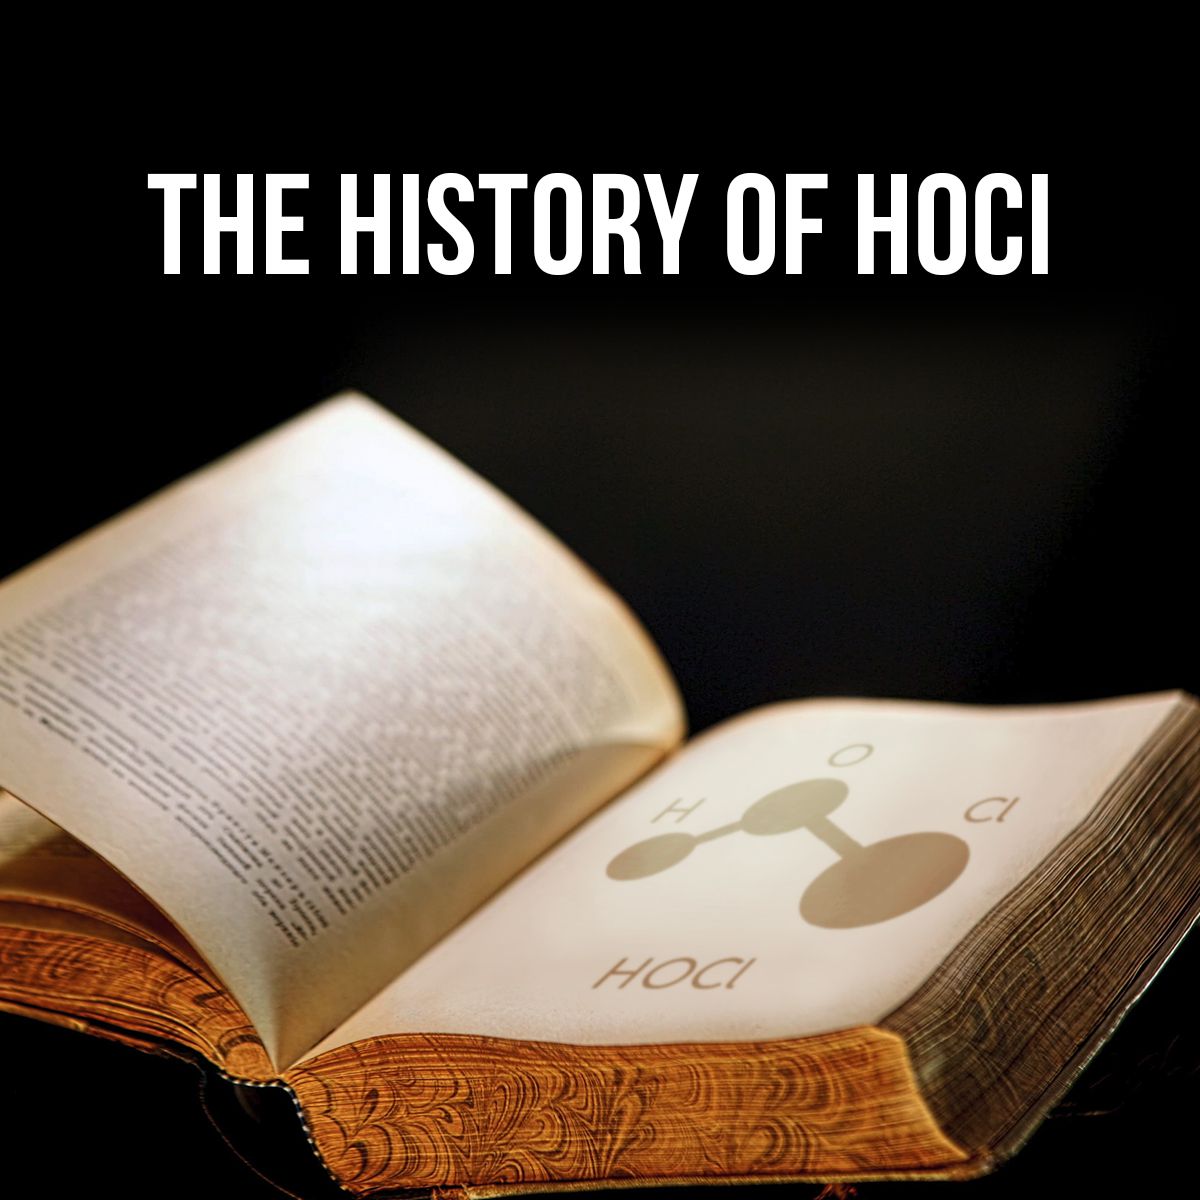 The History of HOCl